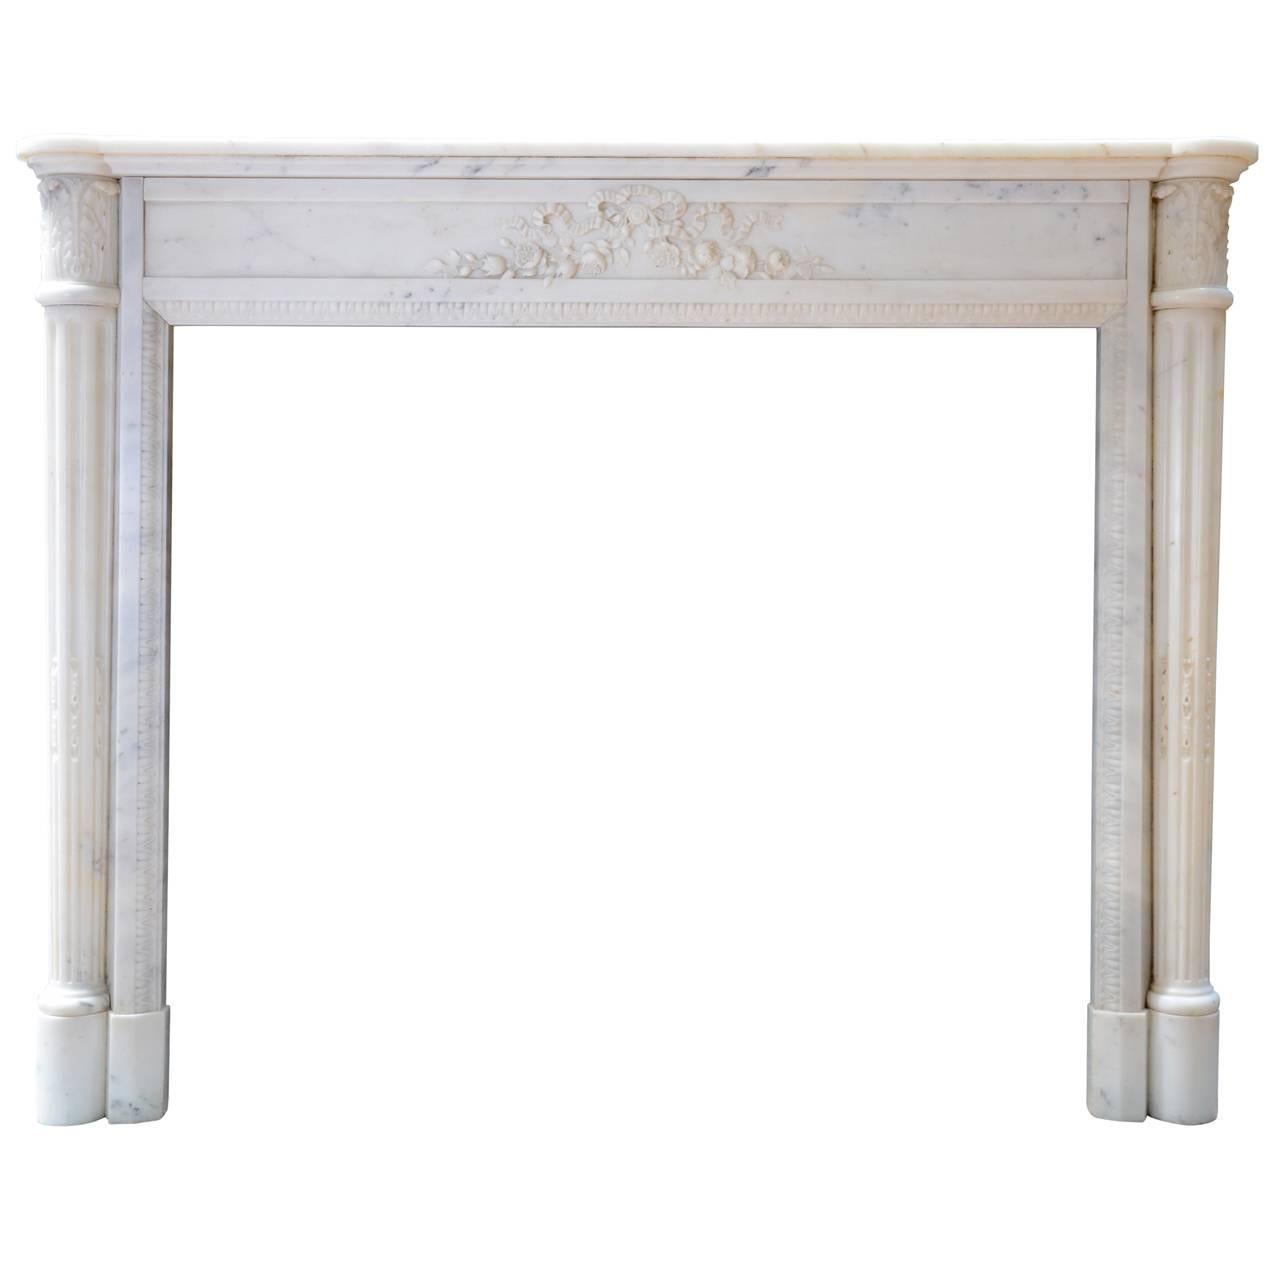 Louis XVI Style White Carrara Marble Fireplace, 19th Century For Sale